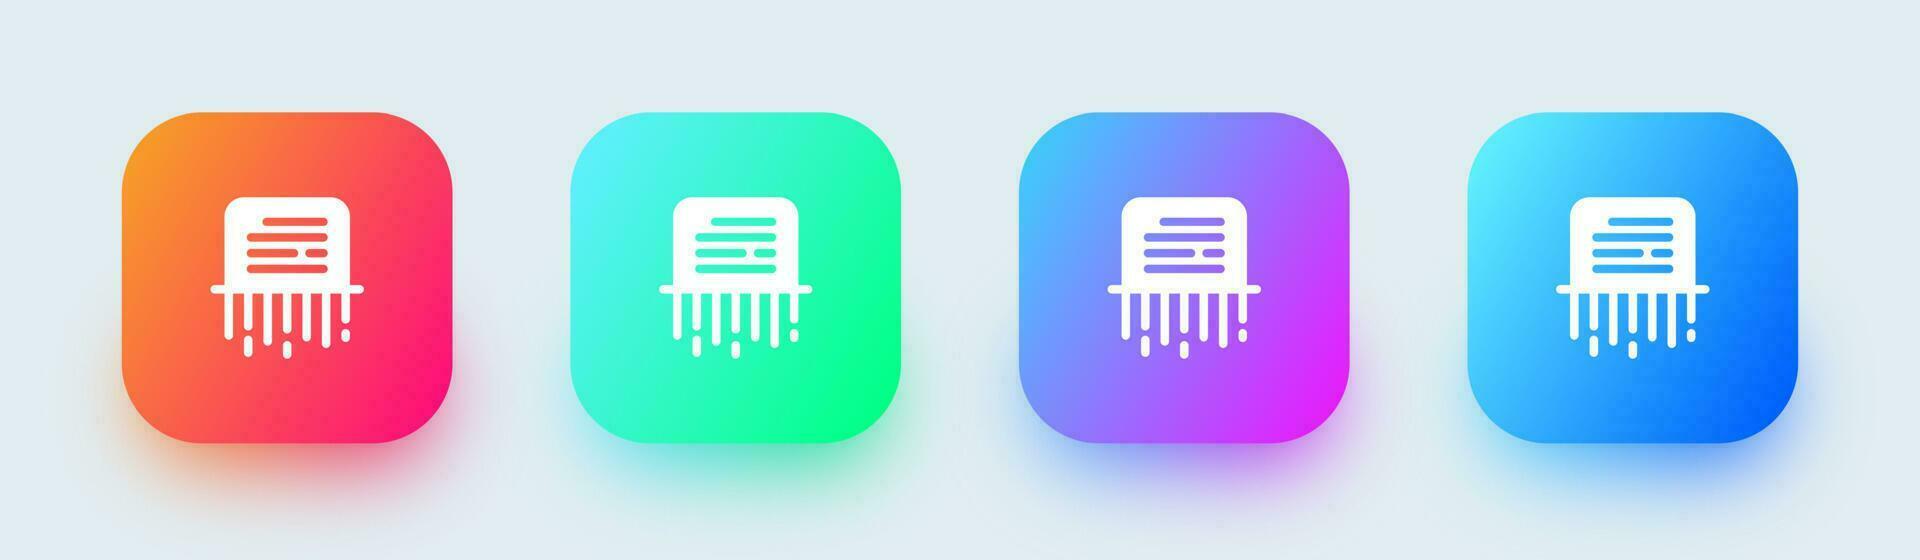 Paper shredder solid icon in square gradient colors. Delete signs vector illustration.